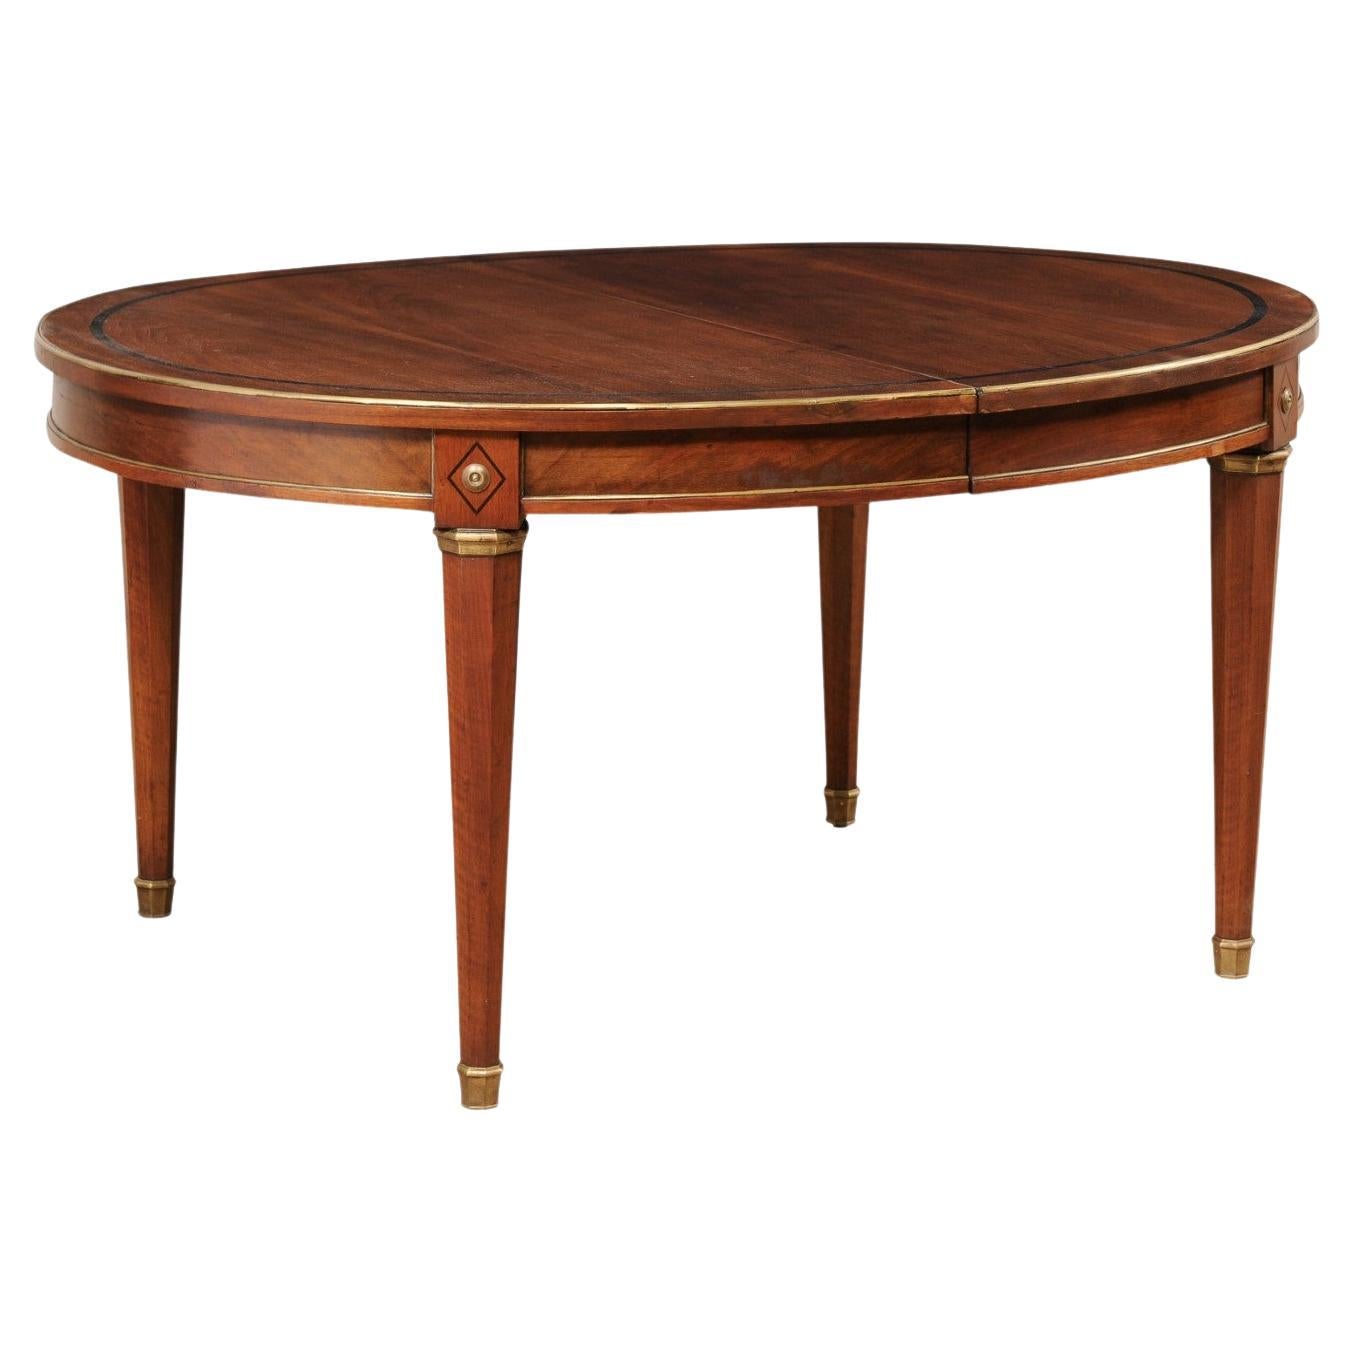 French Neoclassic Style Oval Table with Brass Trim & Accents '1 Leaf Extension' For Sale